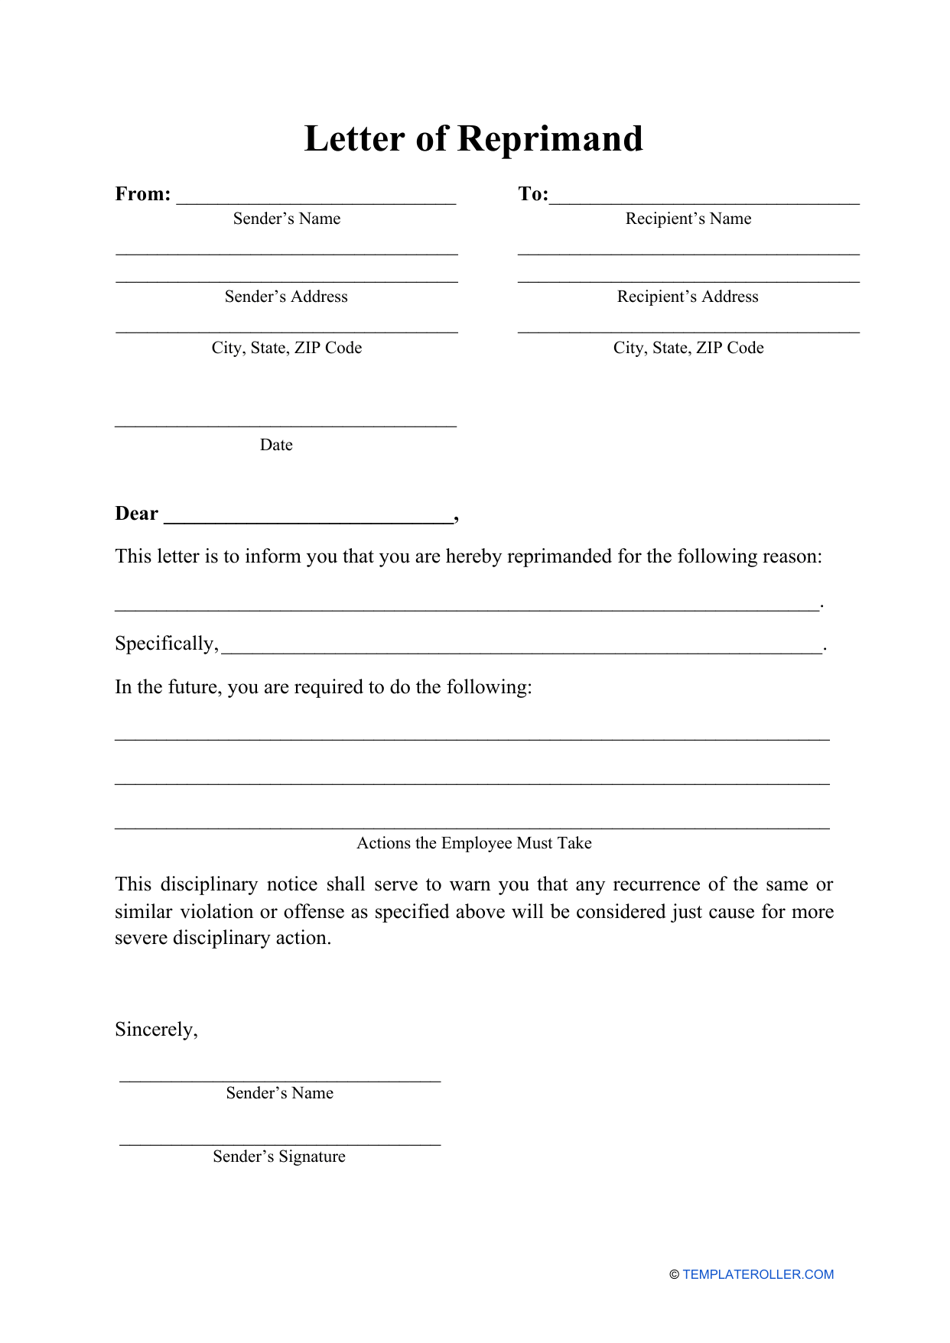 Letter of Reprimand Template Download Printable PDF  Templateroller With Regard To Letter Of Reprimand Template